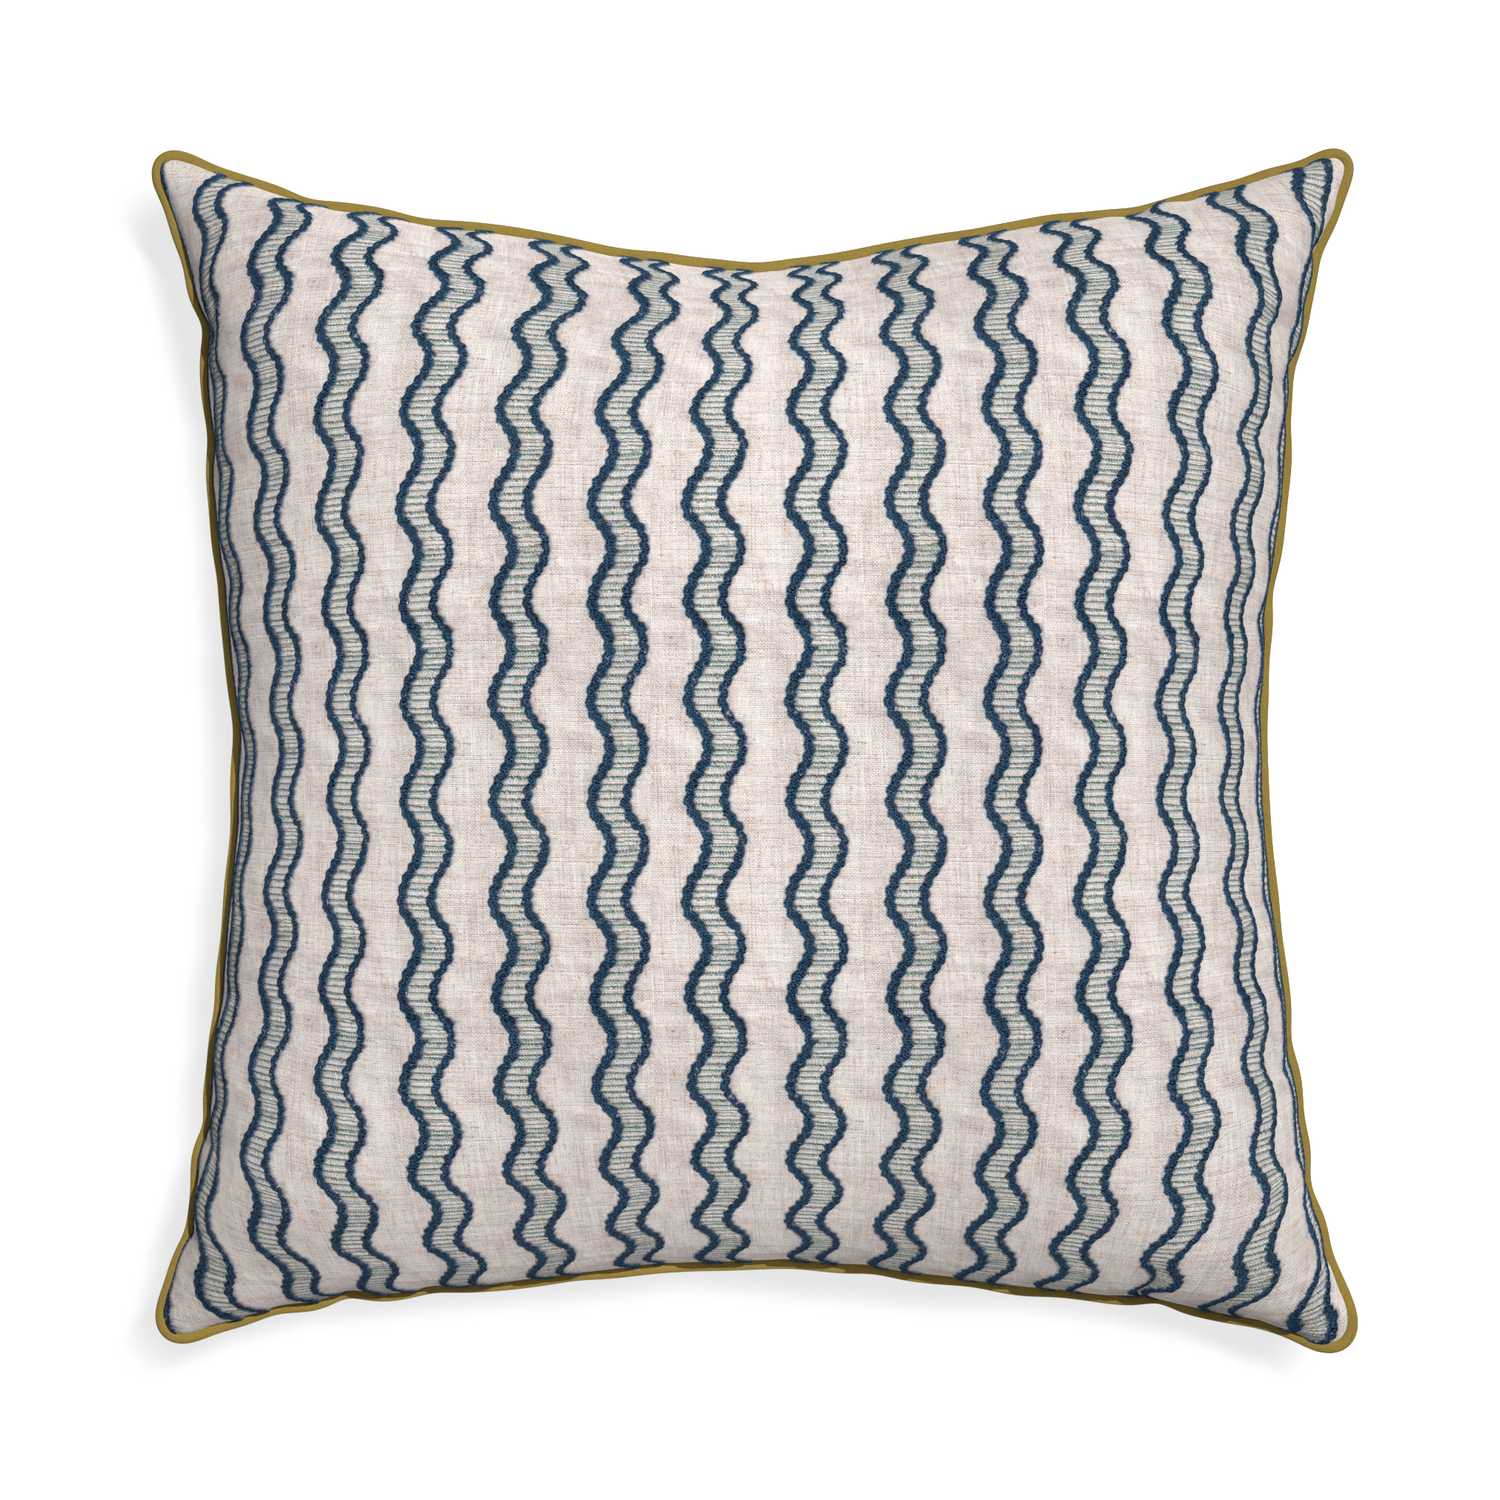 Euro-sham beatrice custom embroidered wavepillow with c piping on white background